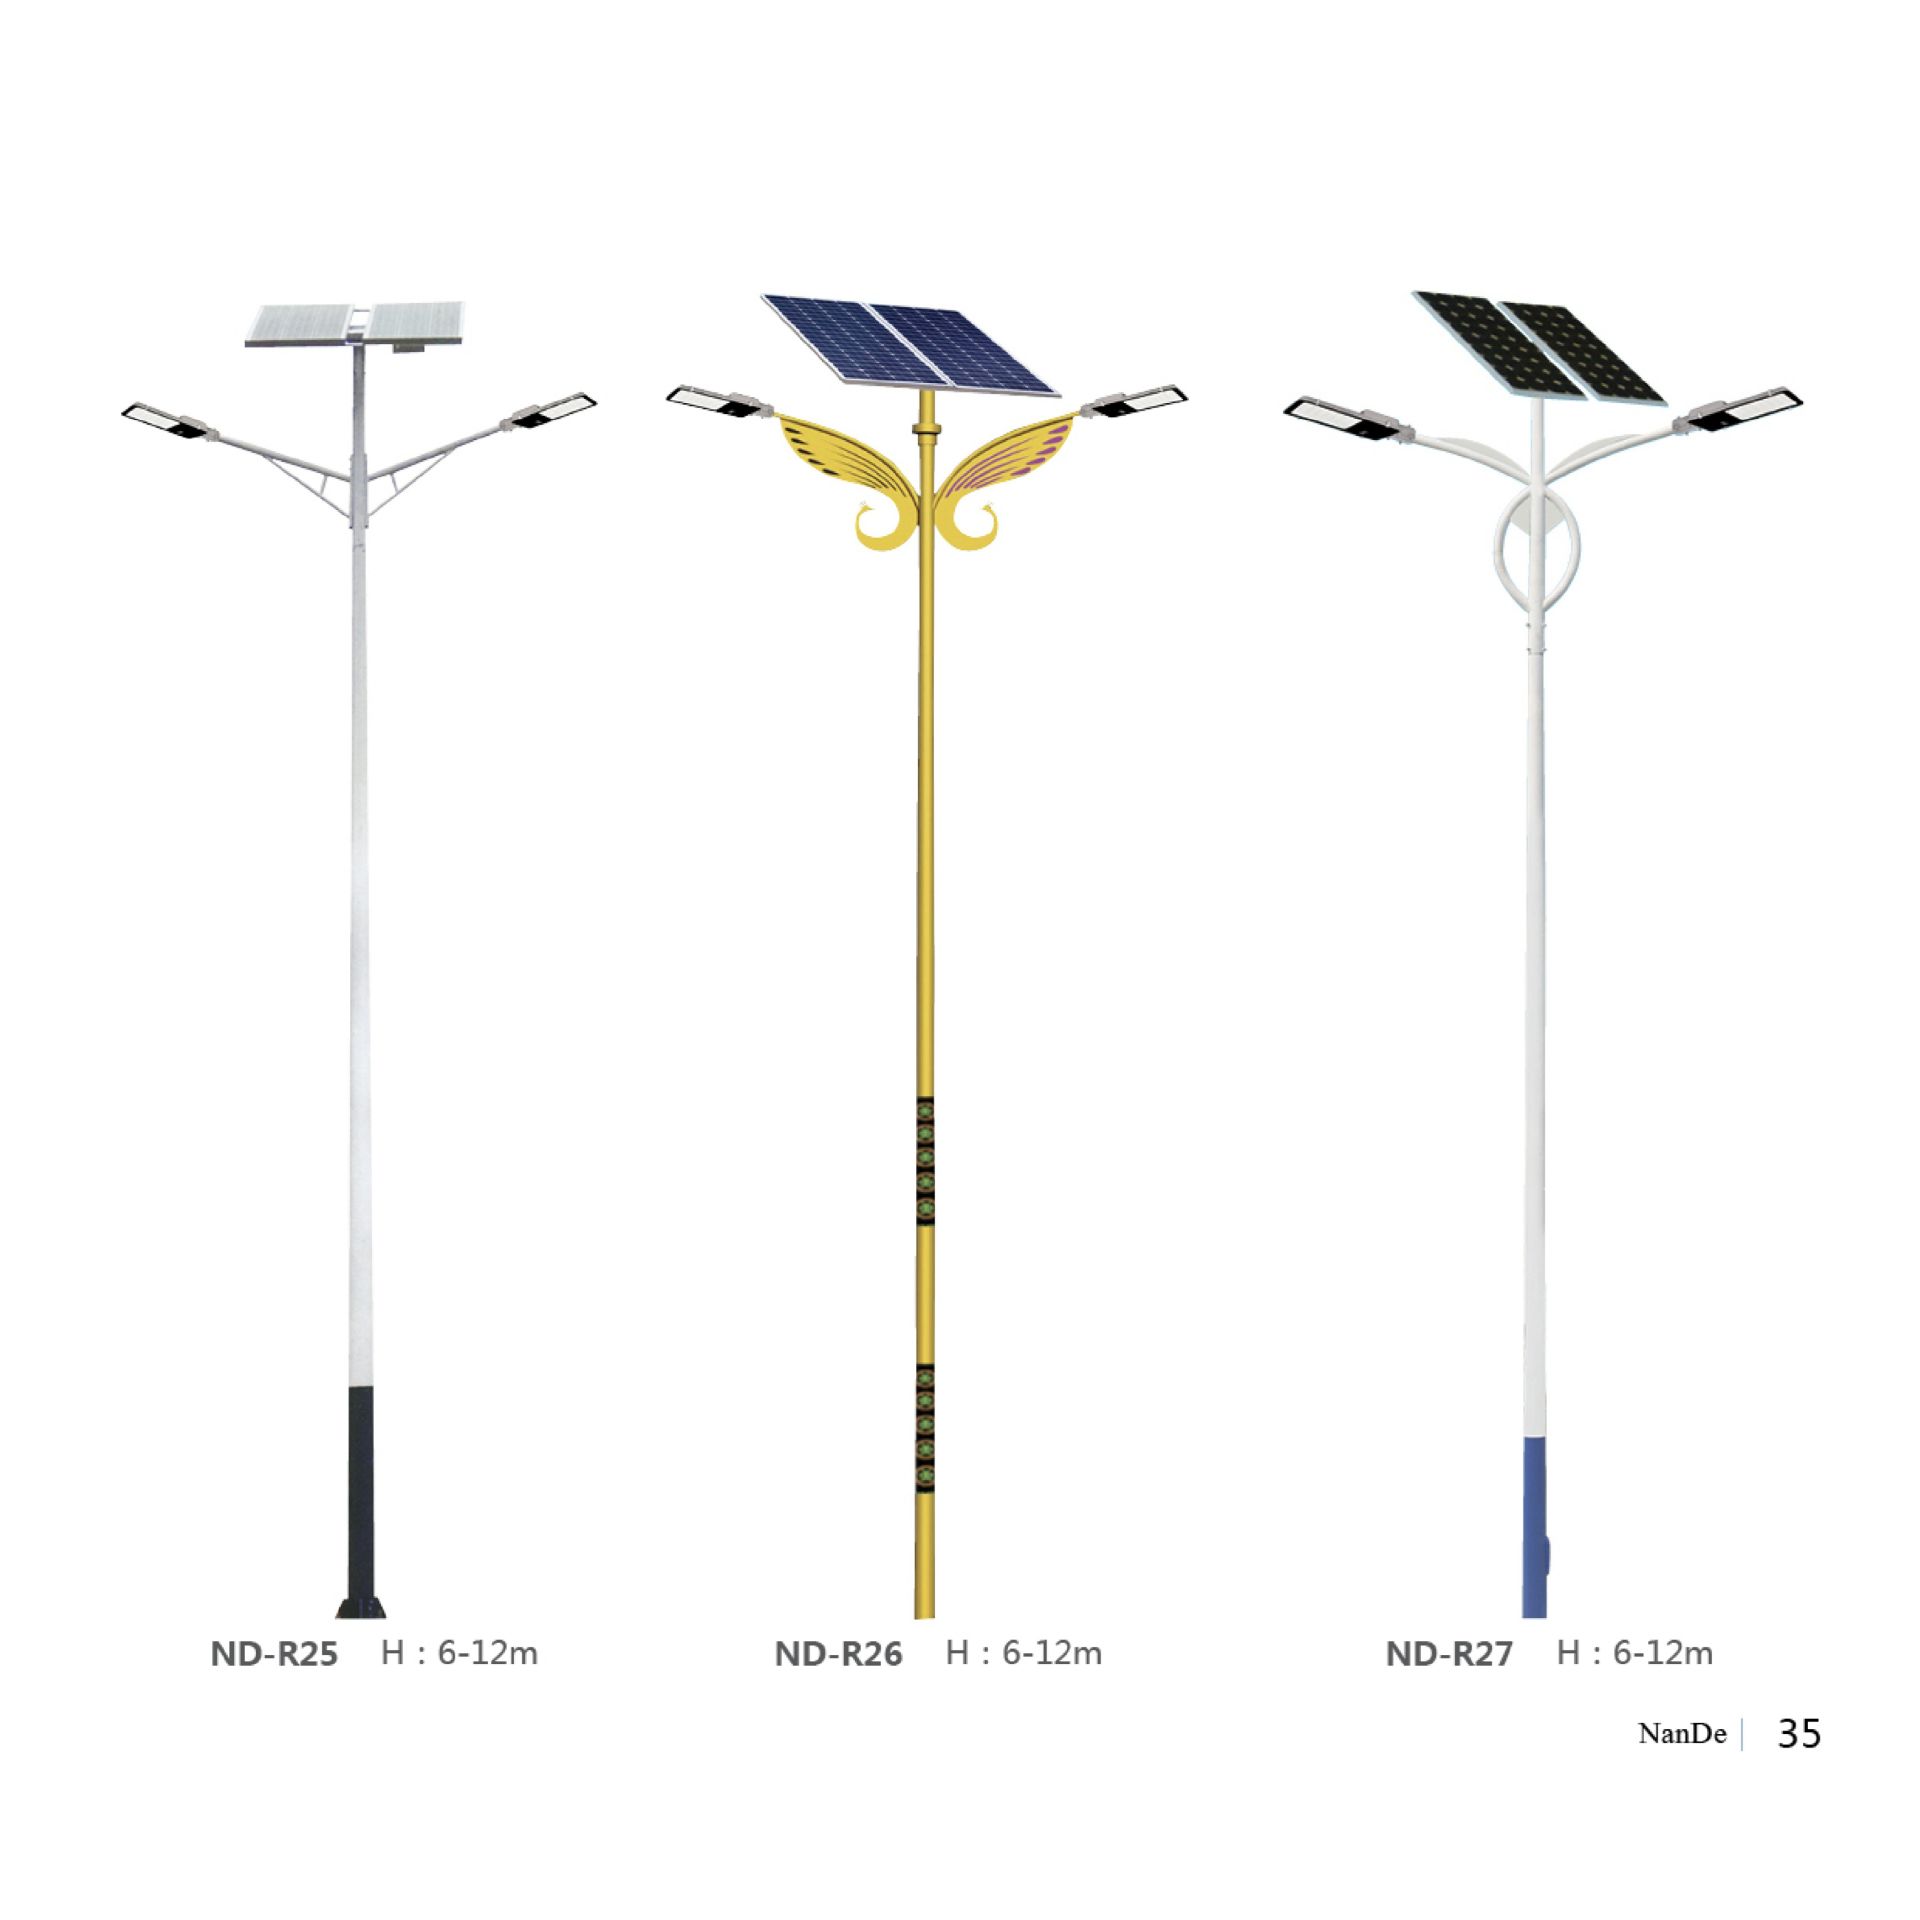 Strictly select solar street lights for outdoor lighting